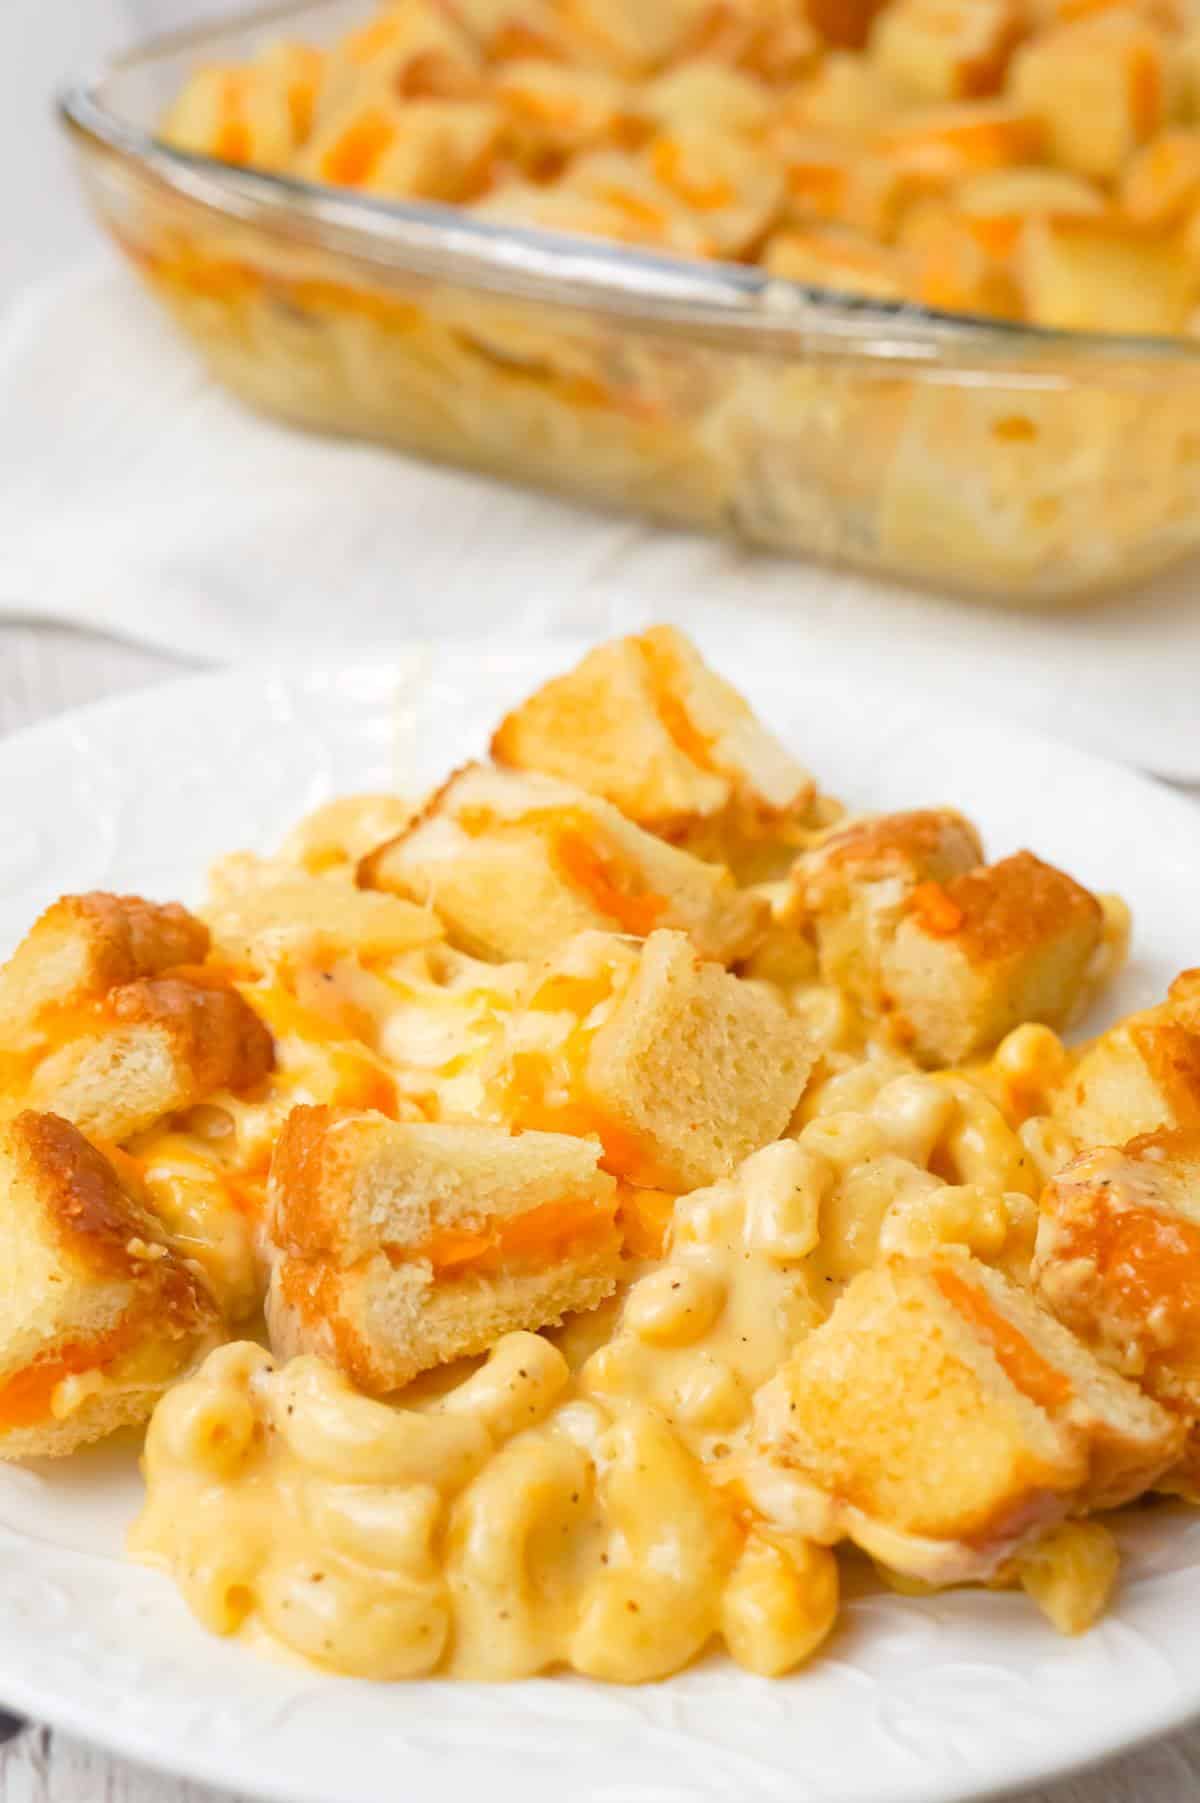 Grilled Cheese Mac and Cheese is a delicious baked macaroni and cheese recipe topped with bite sized pieces of grilled cheese sandwiches.